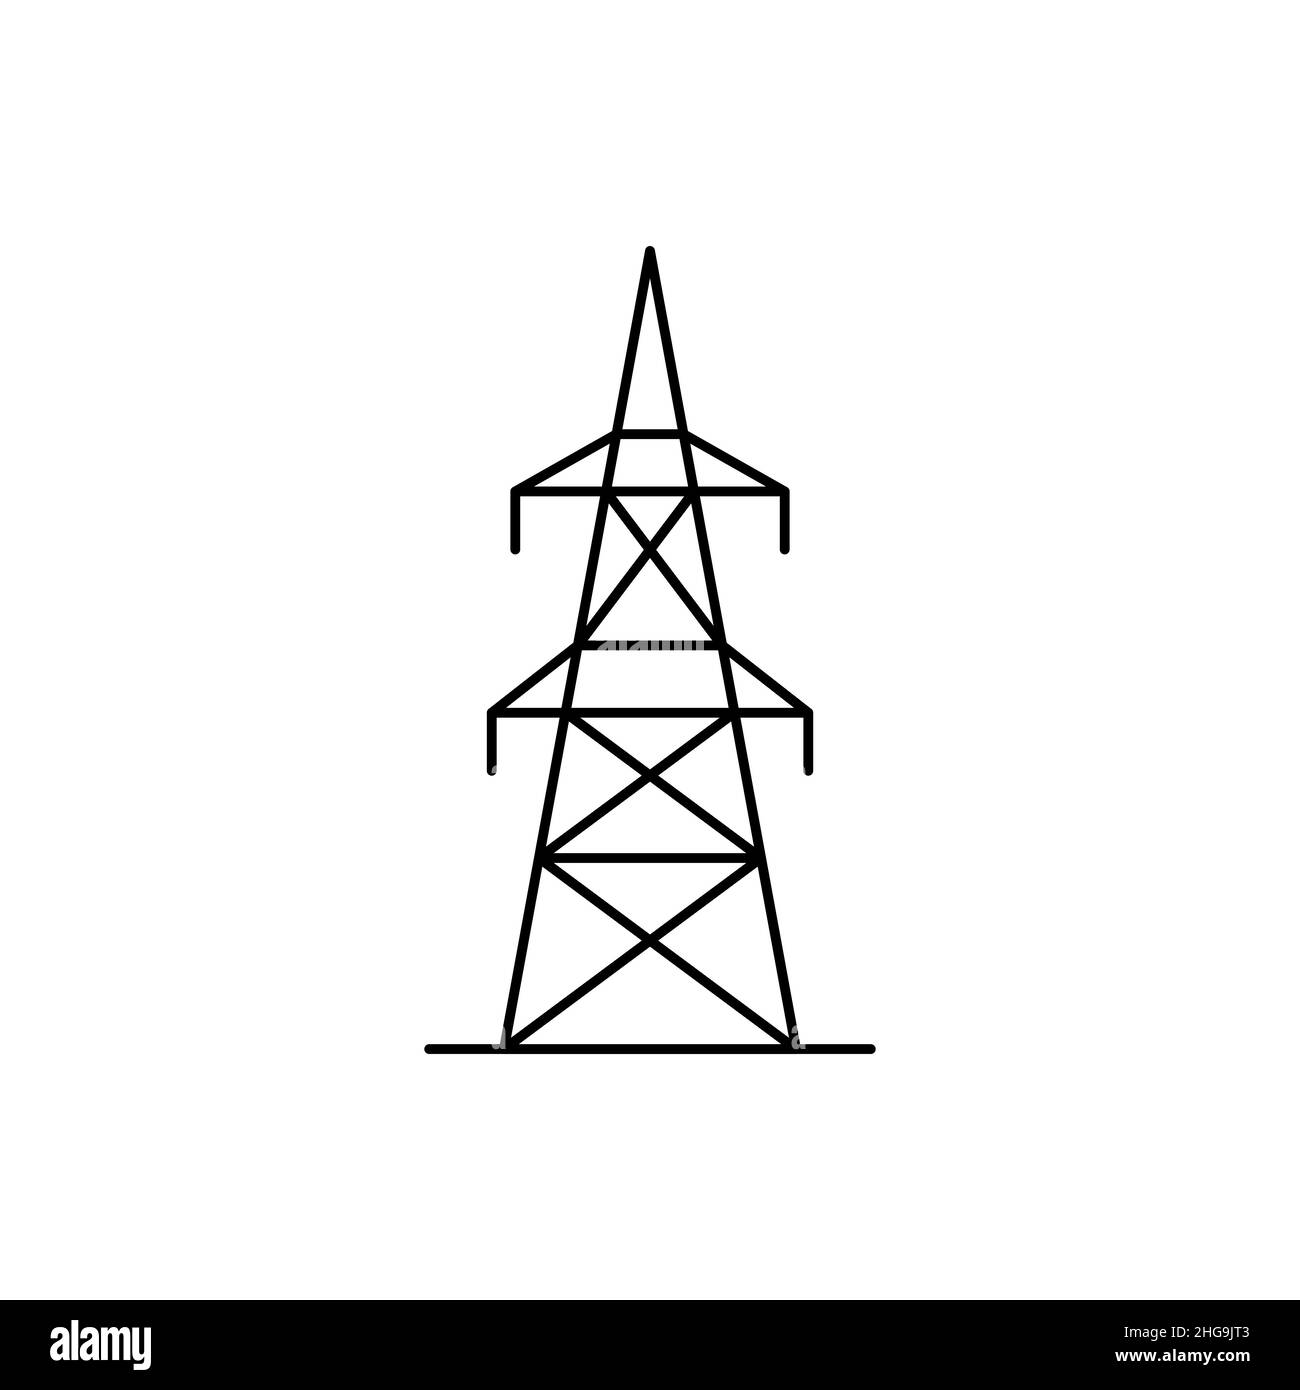 Electricity transmission line. Overhead powerline icon. High voltage electric pole. Electric tower with wires. Electricity post. Utility pole column. Stock Vector